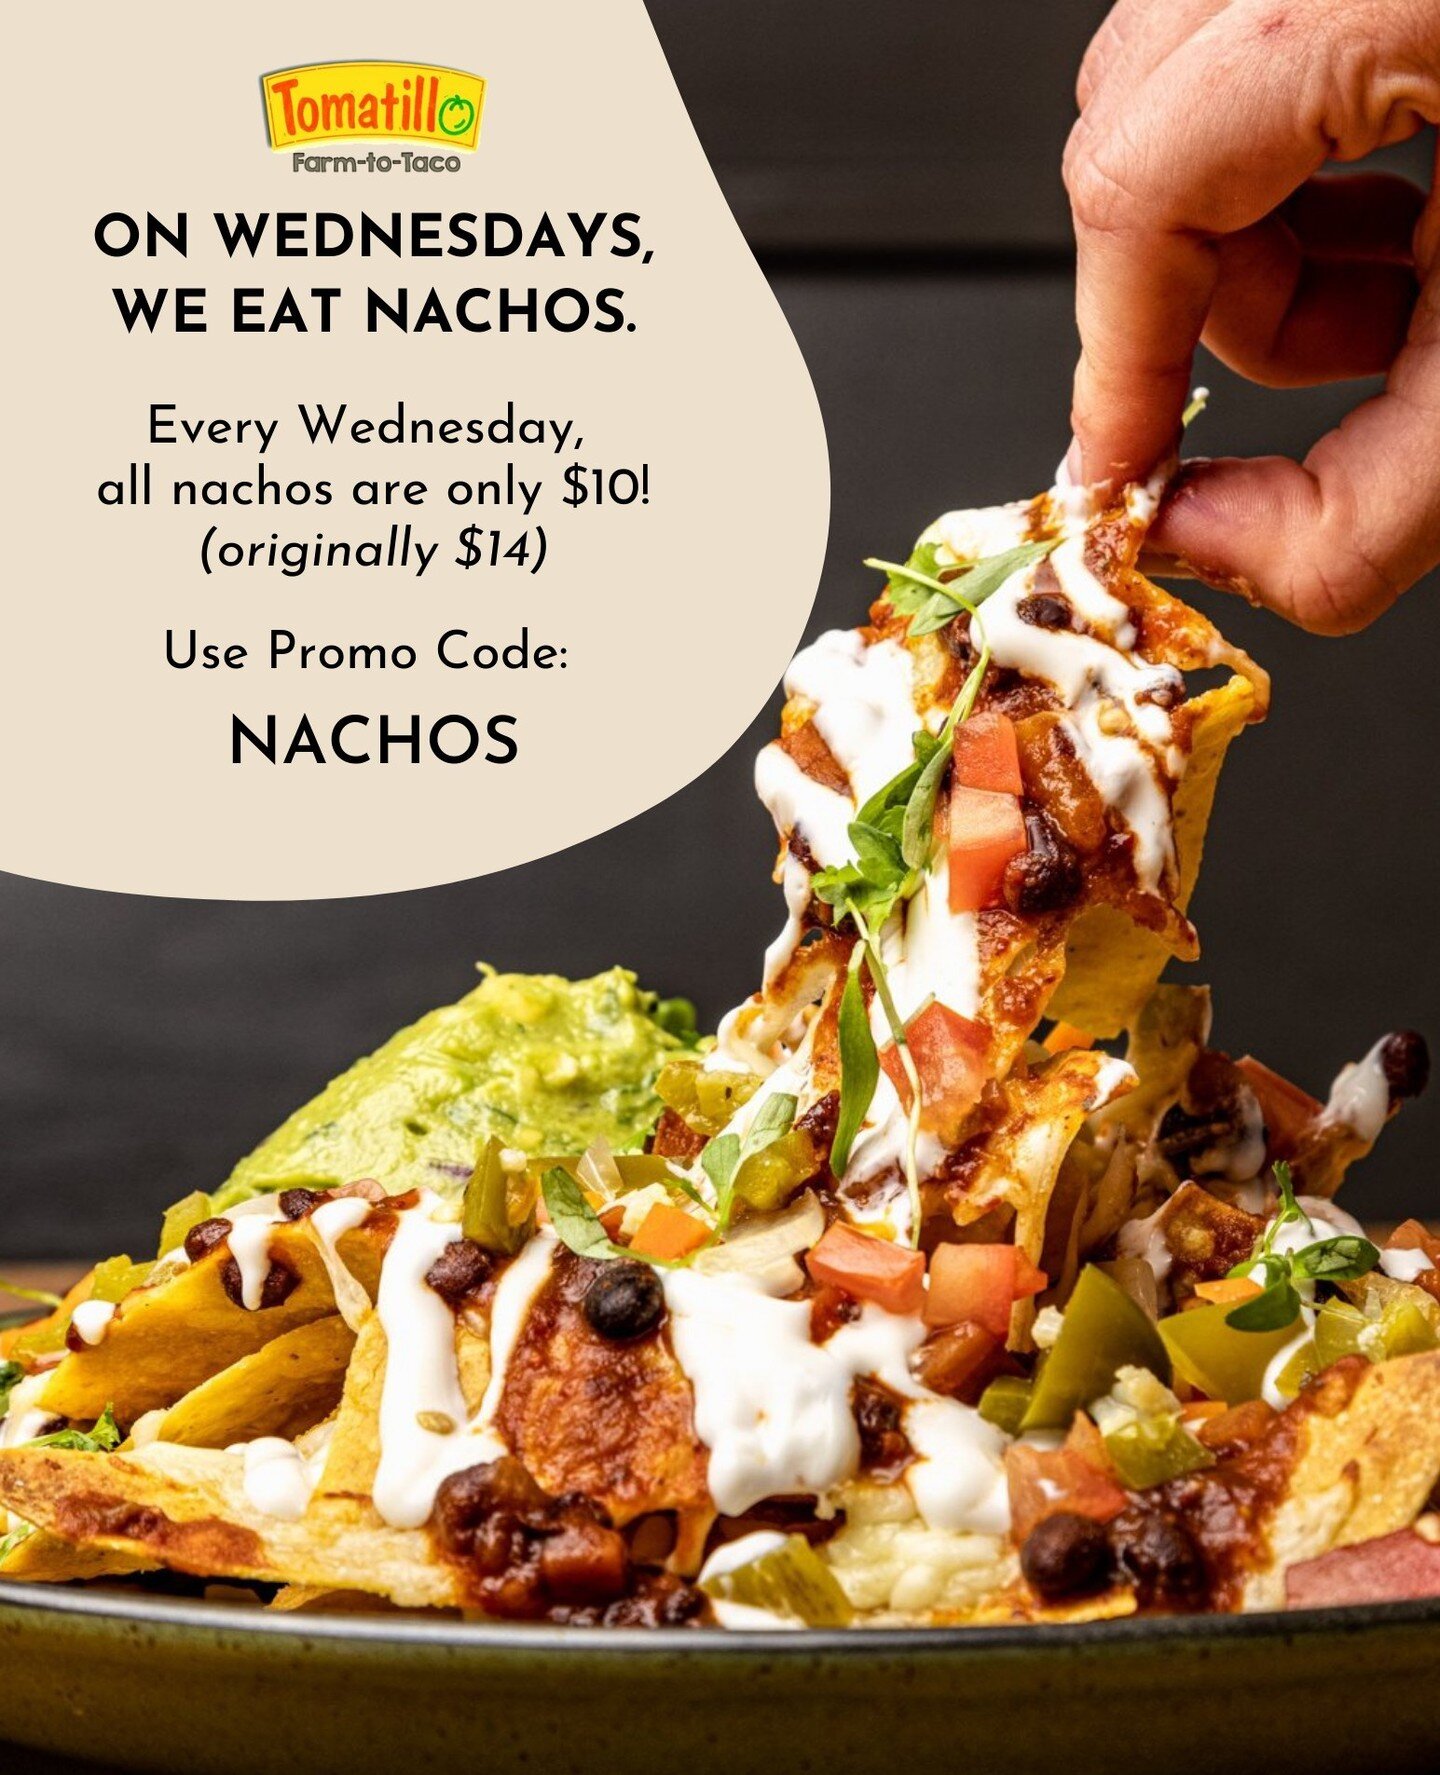 It's Wednesday so that can only mean one thing - time for Nachos. ⁠
⁠
Every Wednesday all nachos are $10 when you dine in or order online through toast, and use promo code NACHOS.